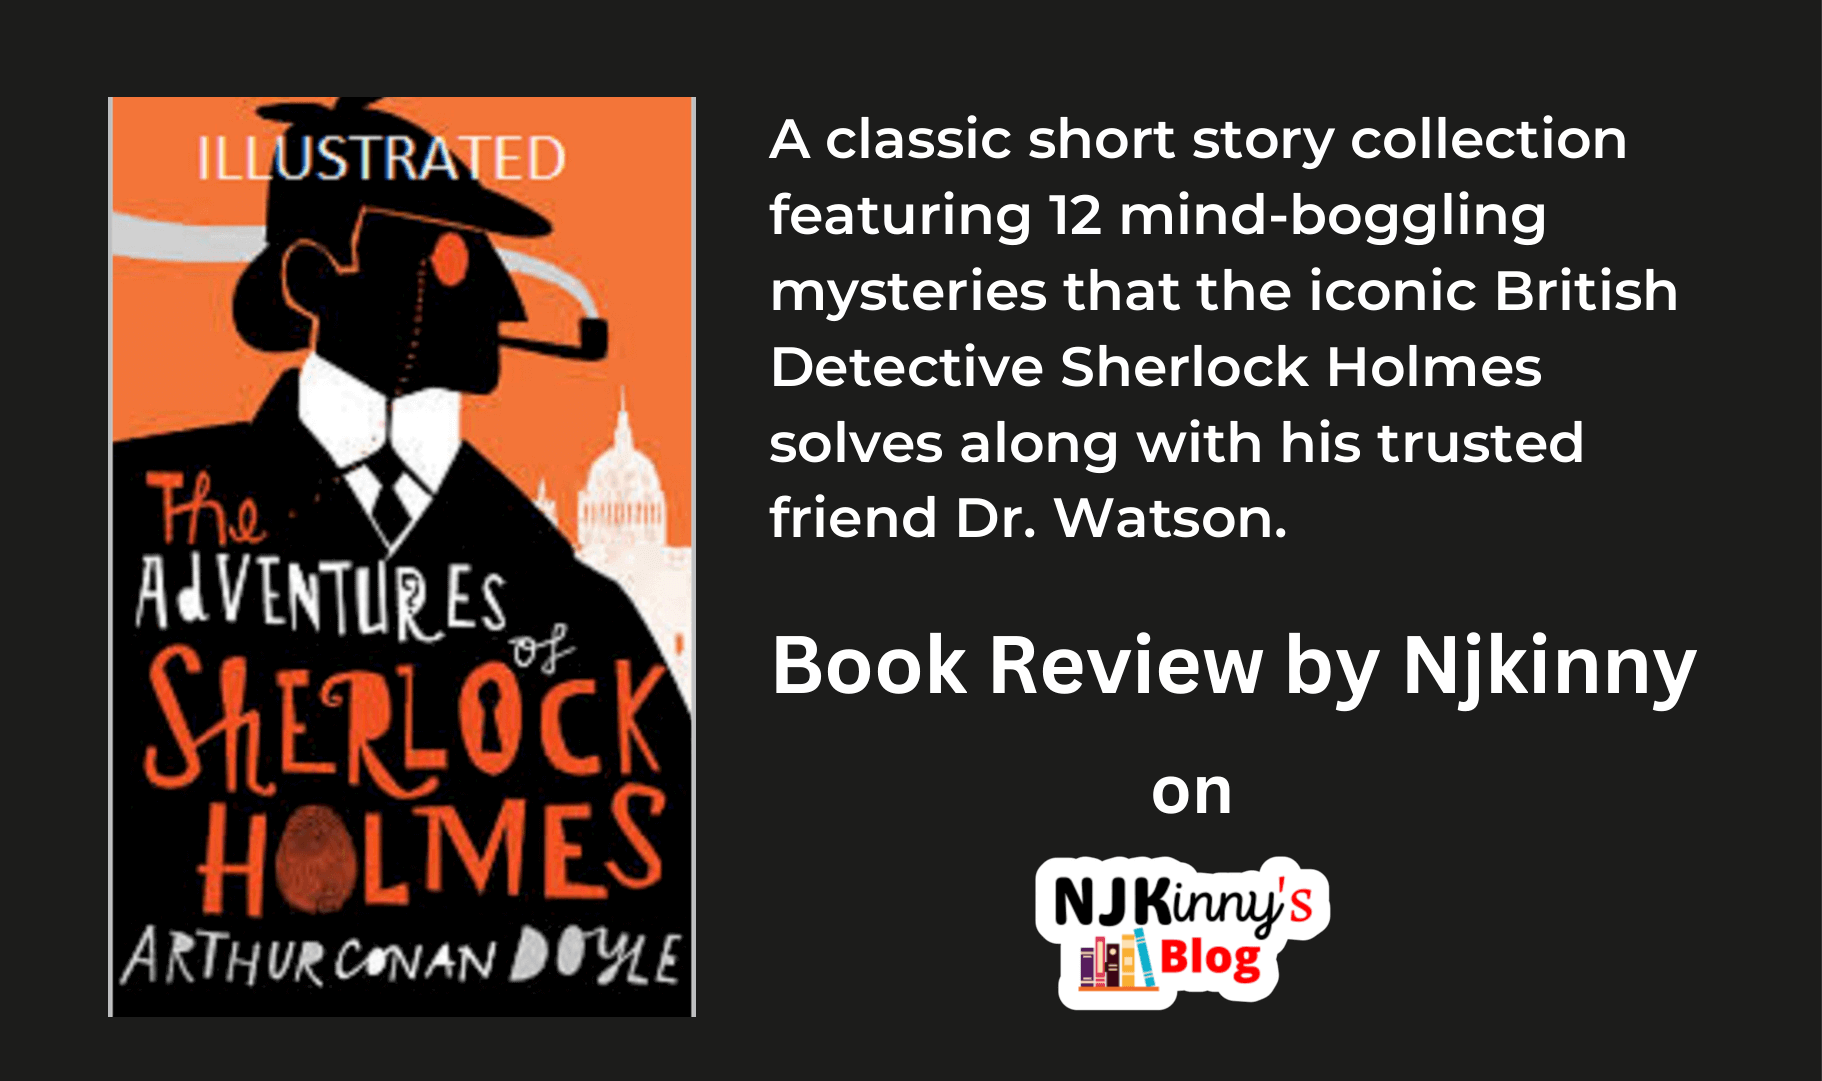 The Adventures of Sherlock Holmes by Arthur Conan Doyle Book Review, Book Summary, Book Cover, Reading Age, Release Date, Genre, Books Reading Order, Sherlock Holmes Book Quotes on Njkinny's Blog